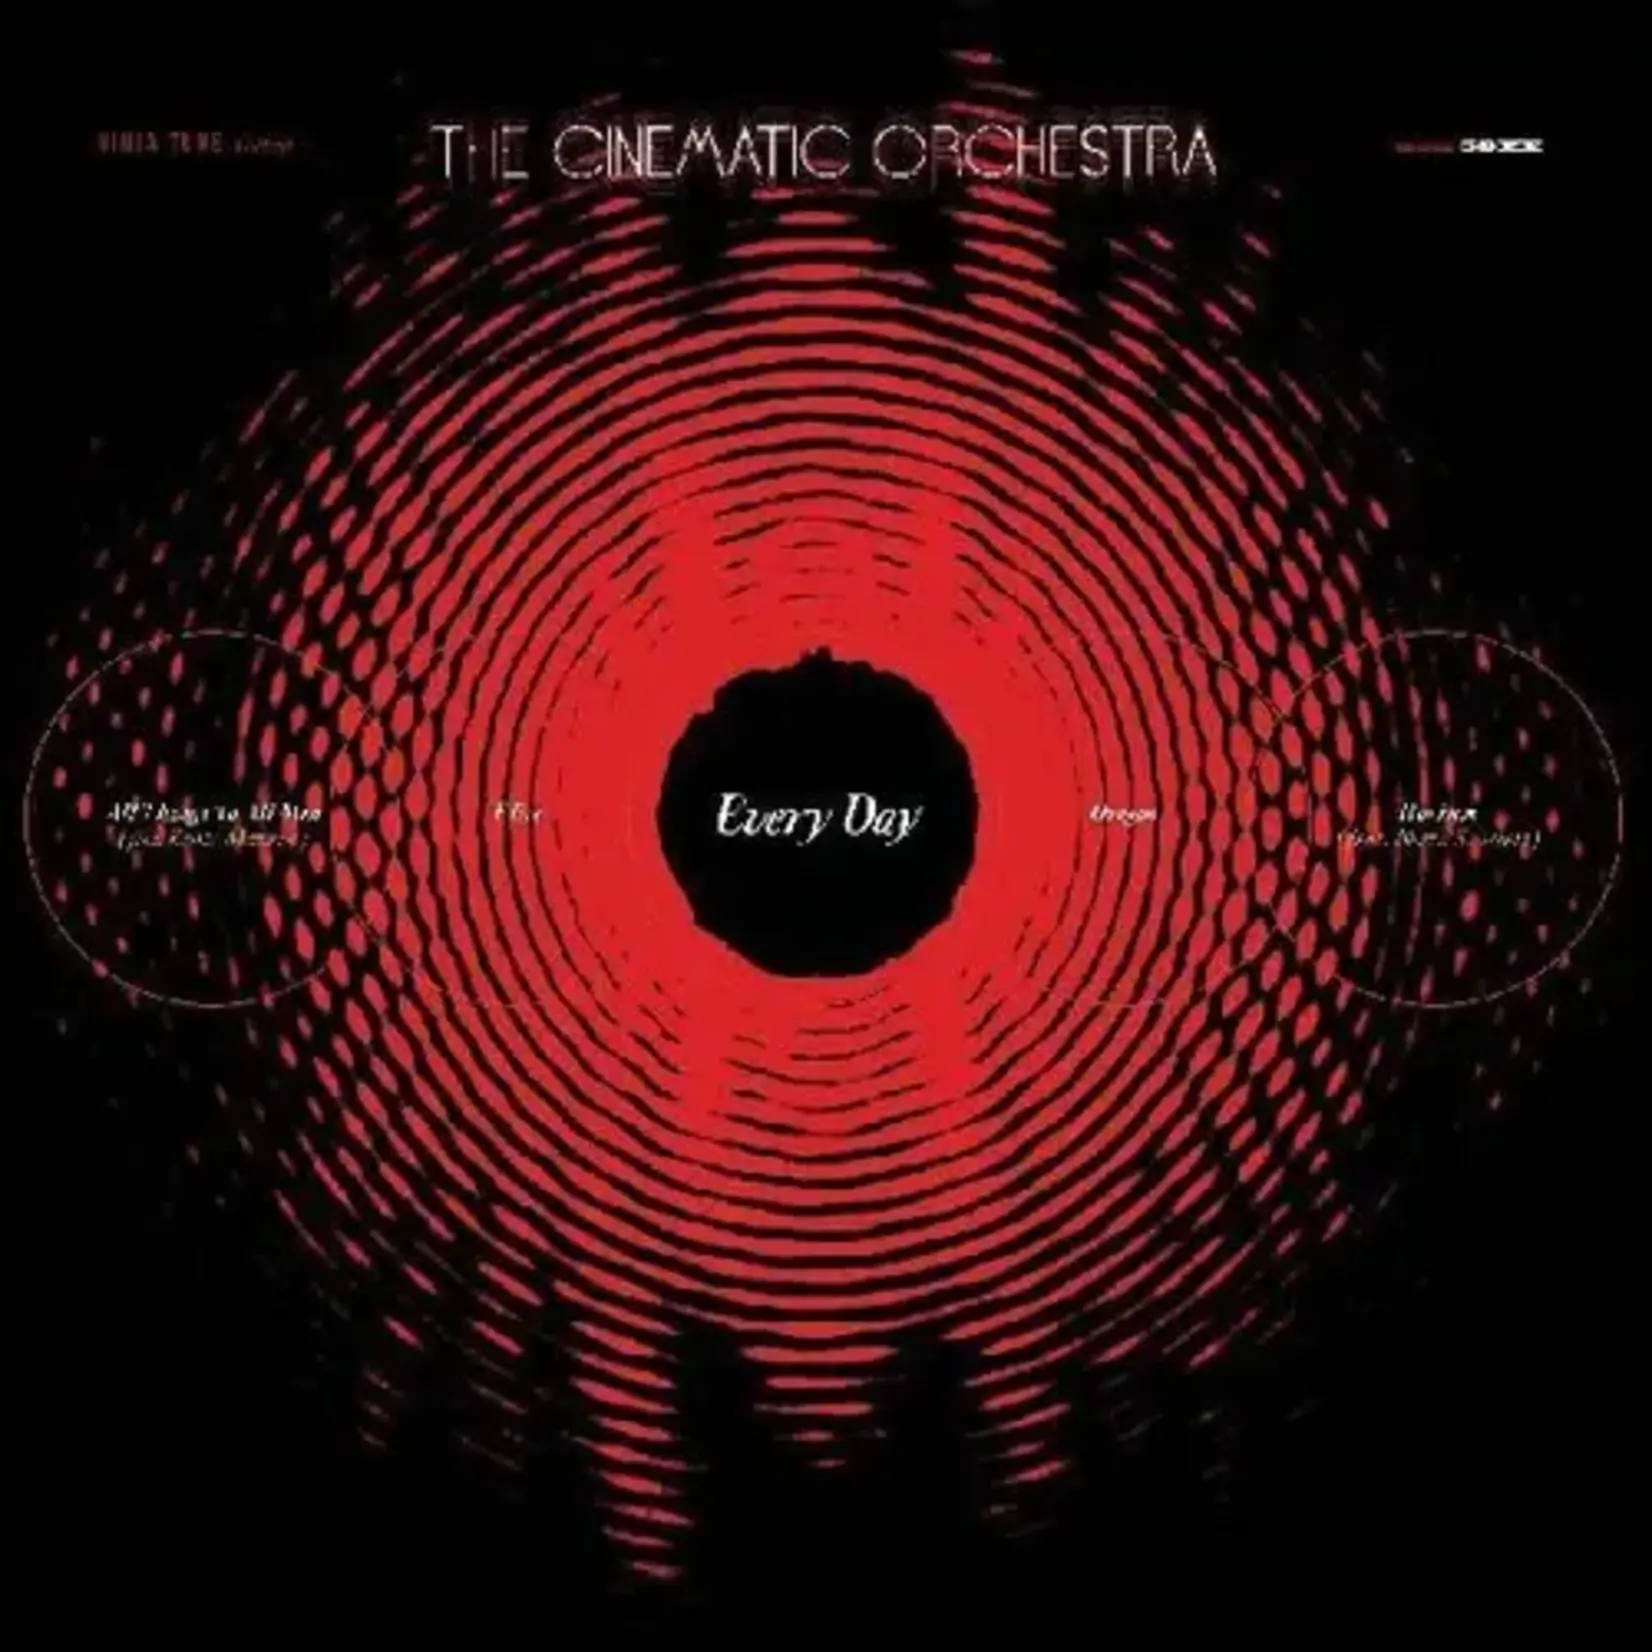 [New] Cinematic Orchestra, The: Every Day (20th Anniversary Edition, translucent red vinyl) [NINJA TUNE]